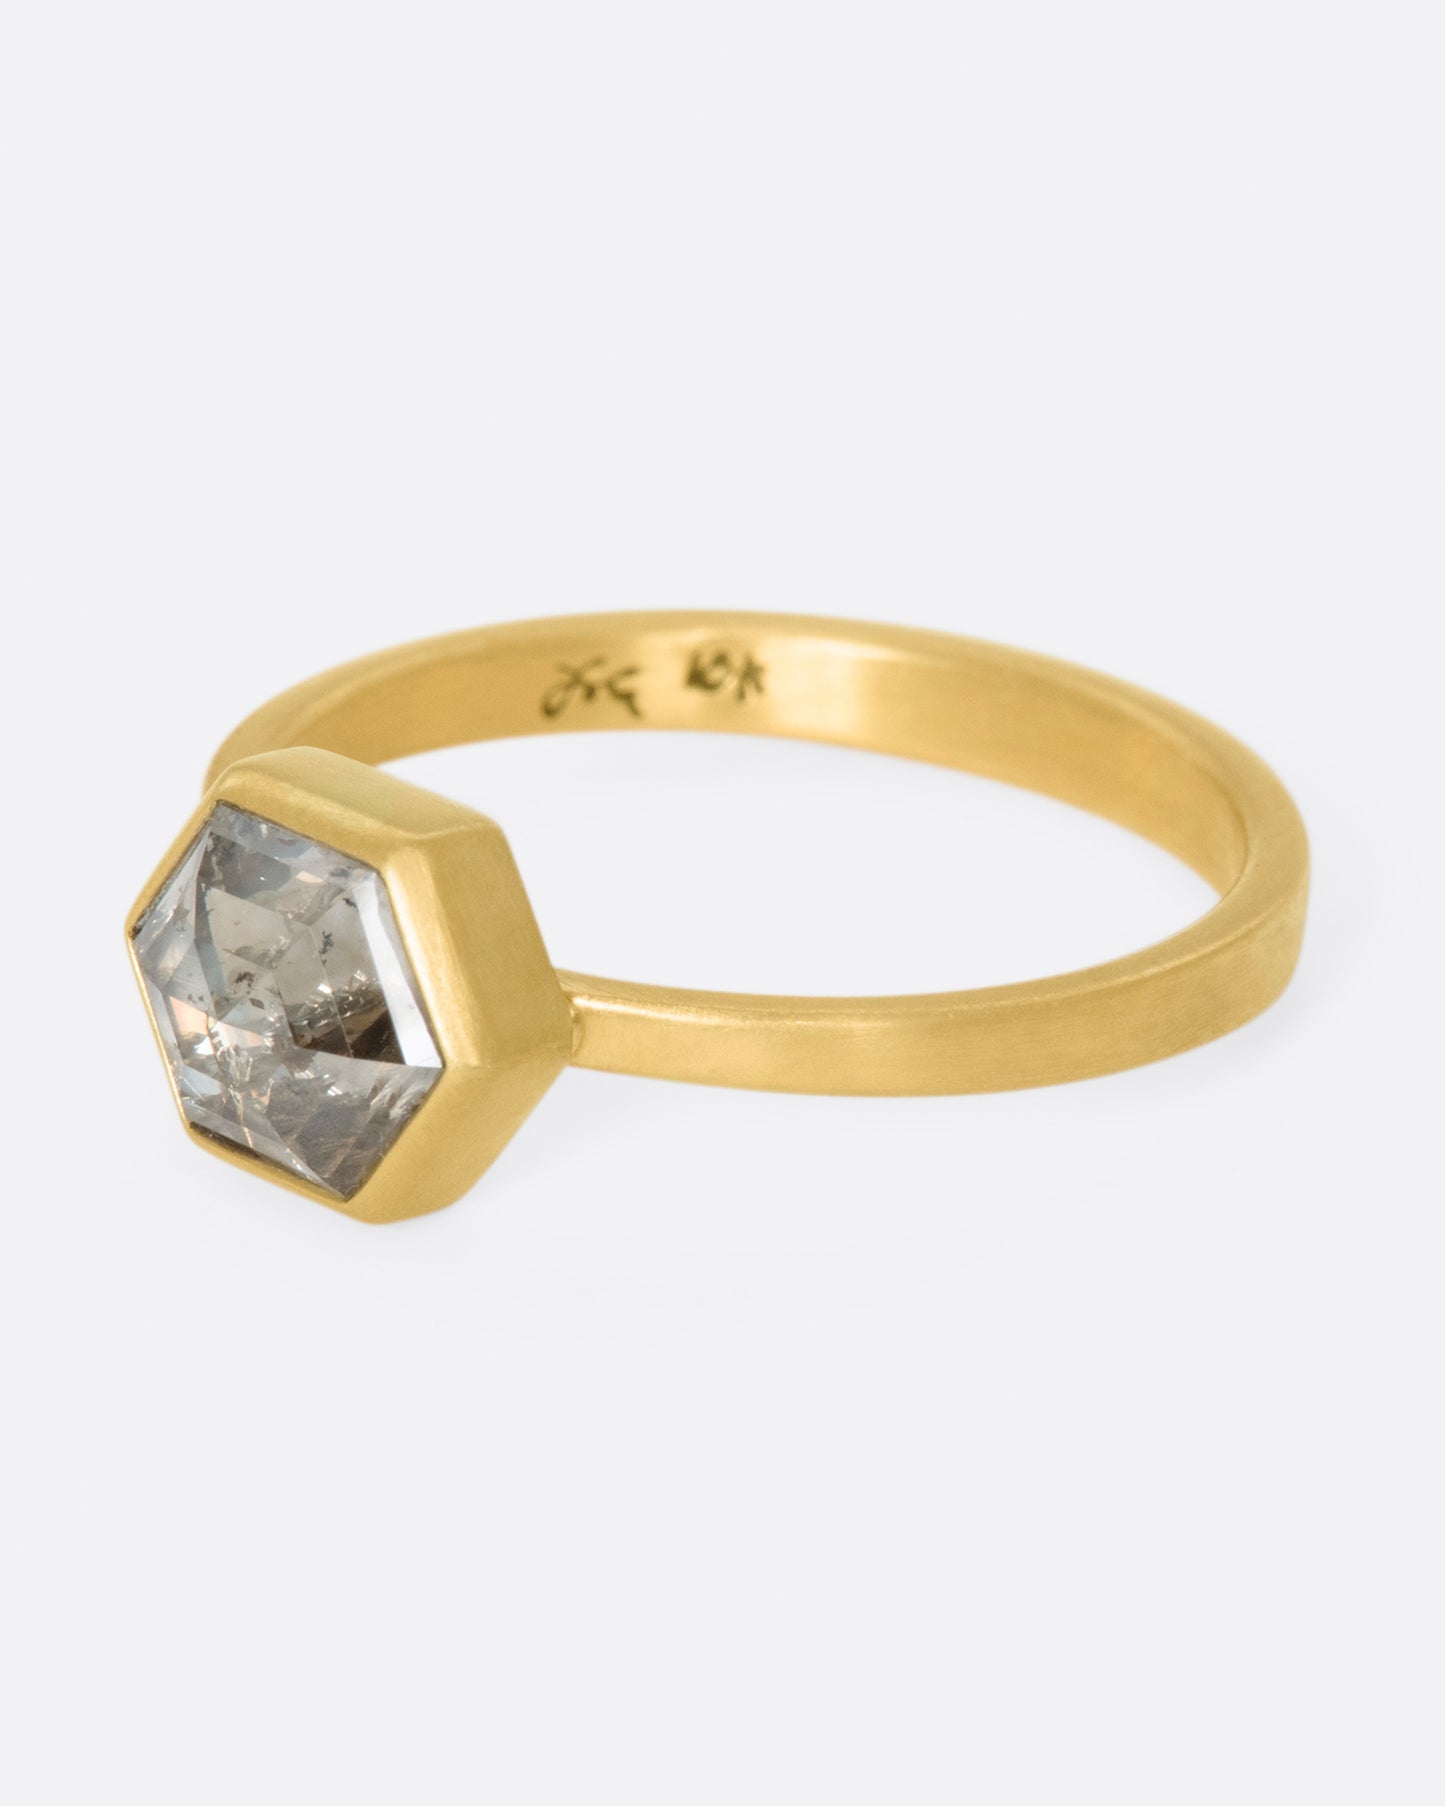 A hexagonal, faceted diamond whose colors range from shades of brown to gray